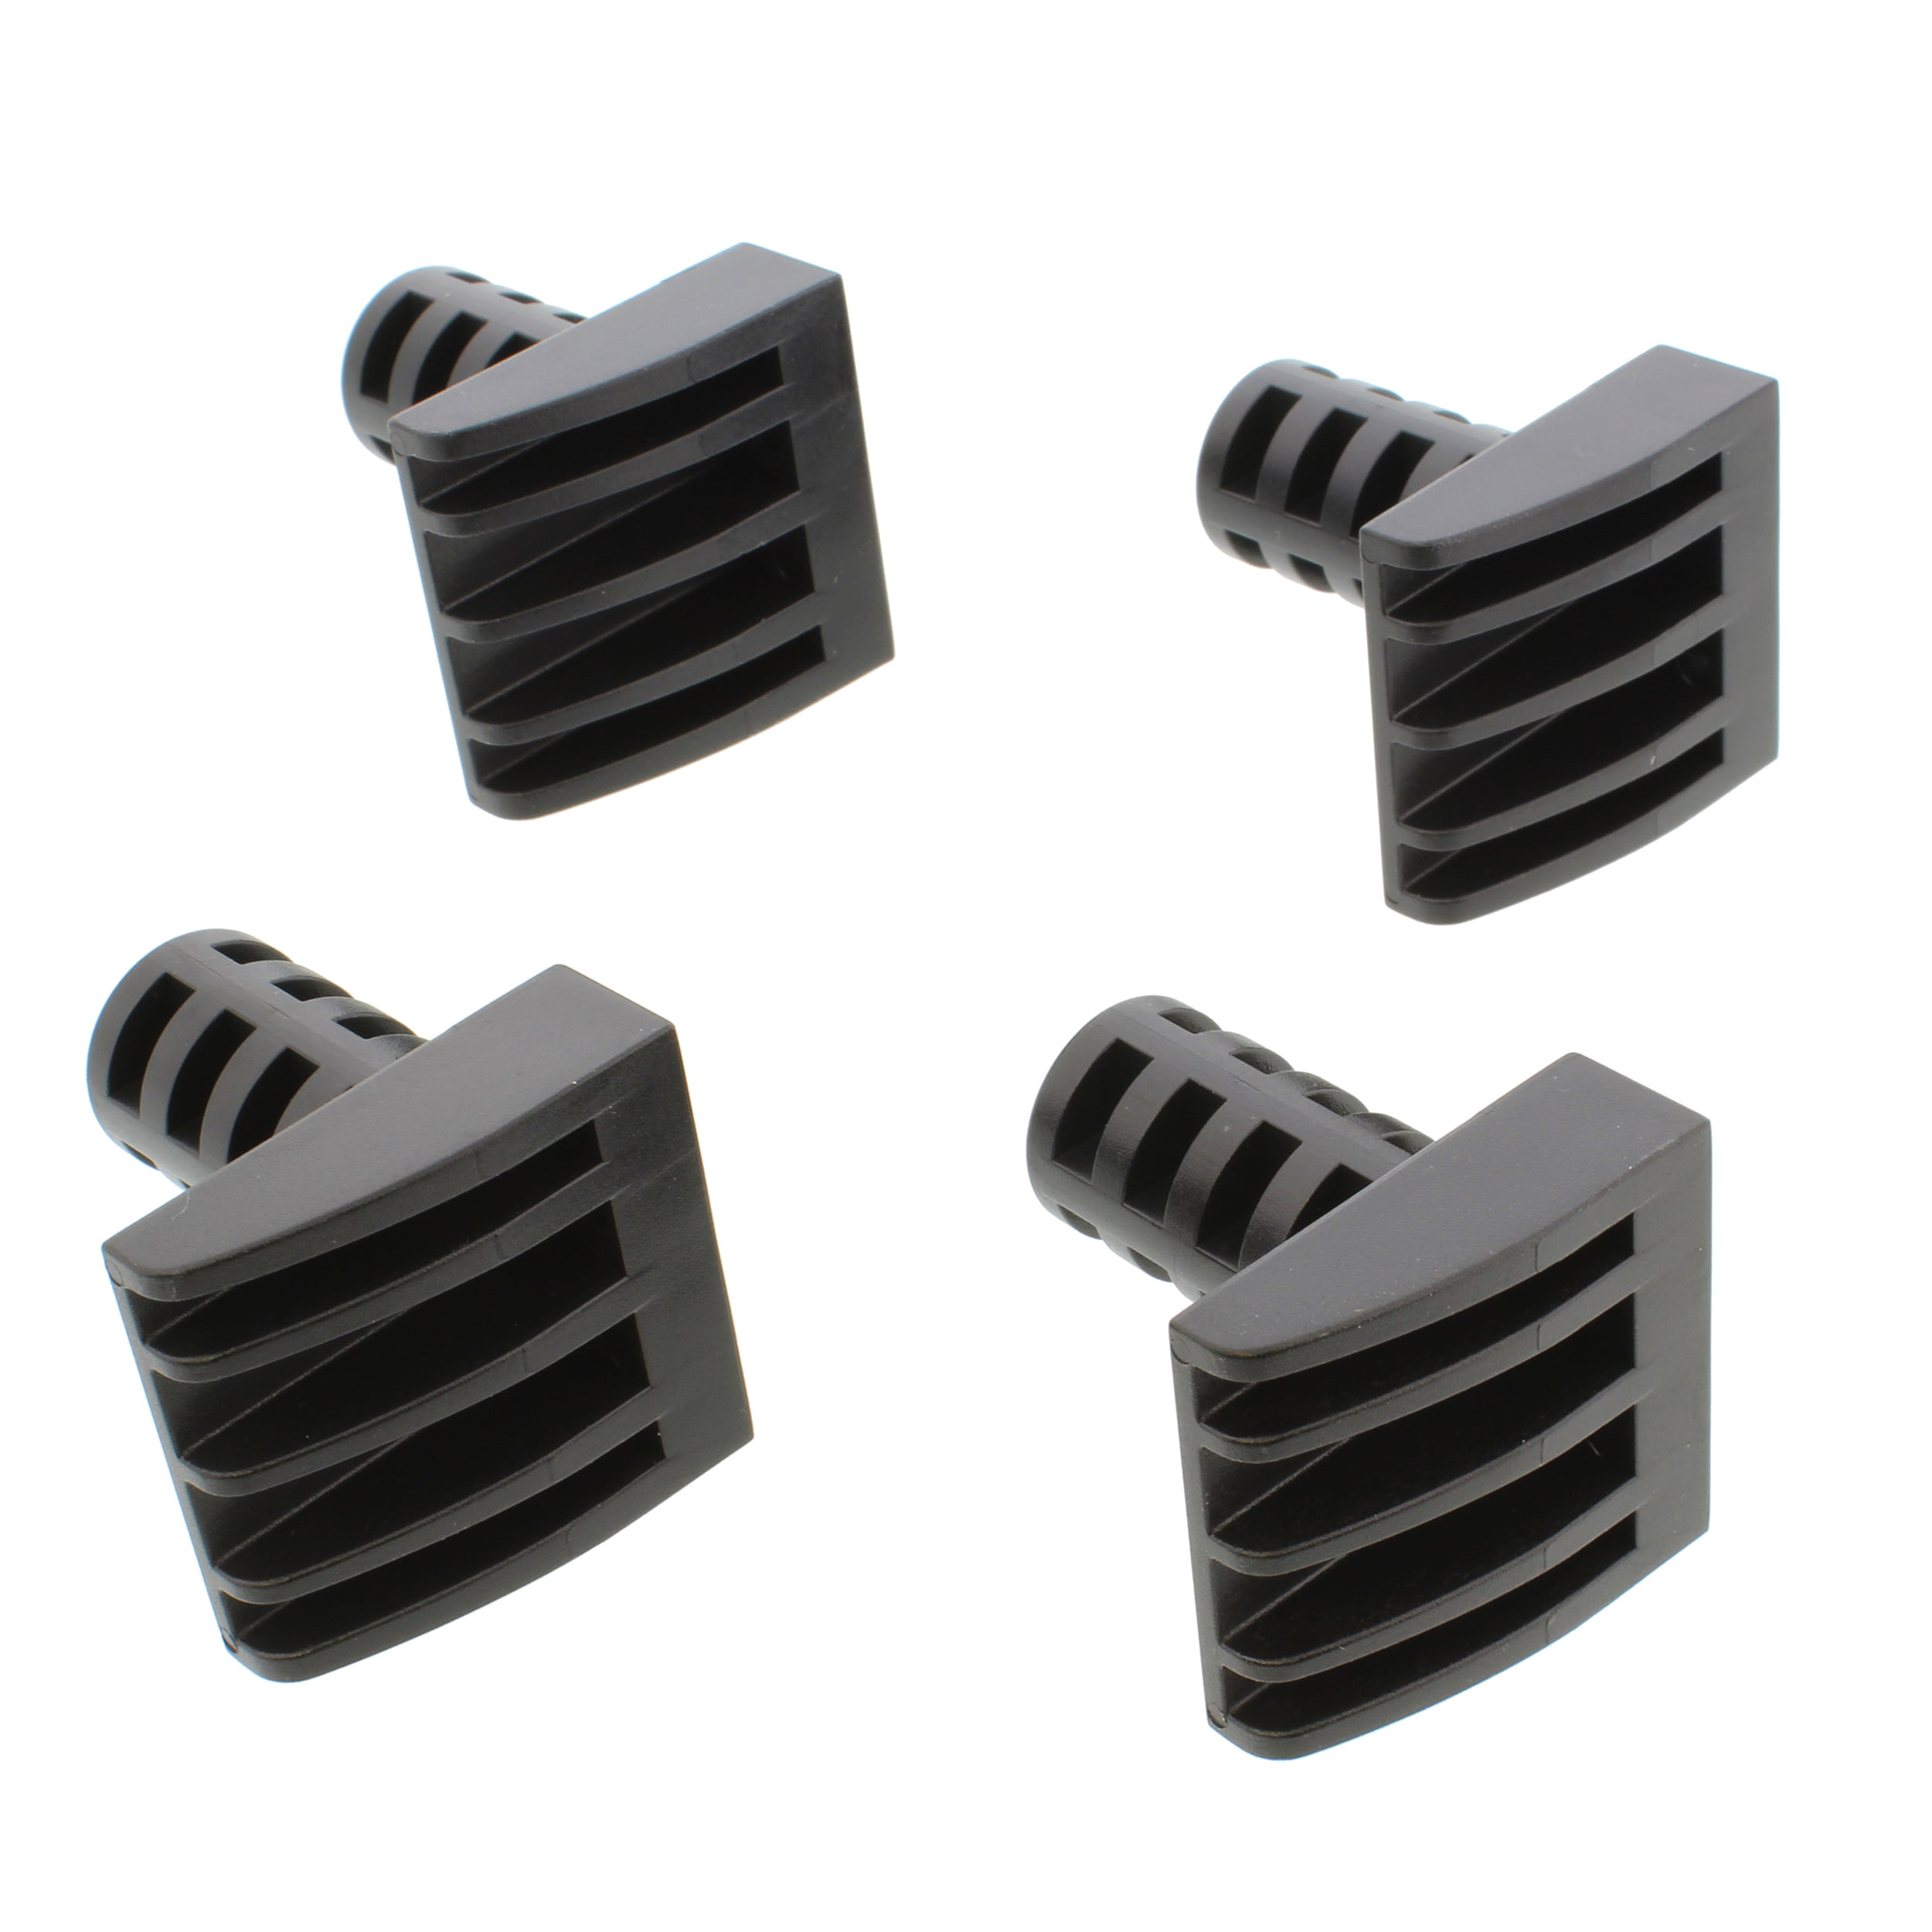 Pack of 4 Large Black Plastic Workmate Workbench Vice Clamp Pegs Work Bench Dogs